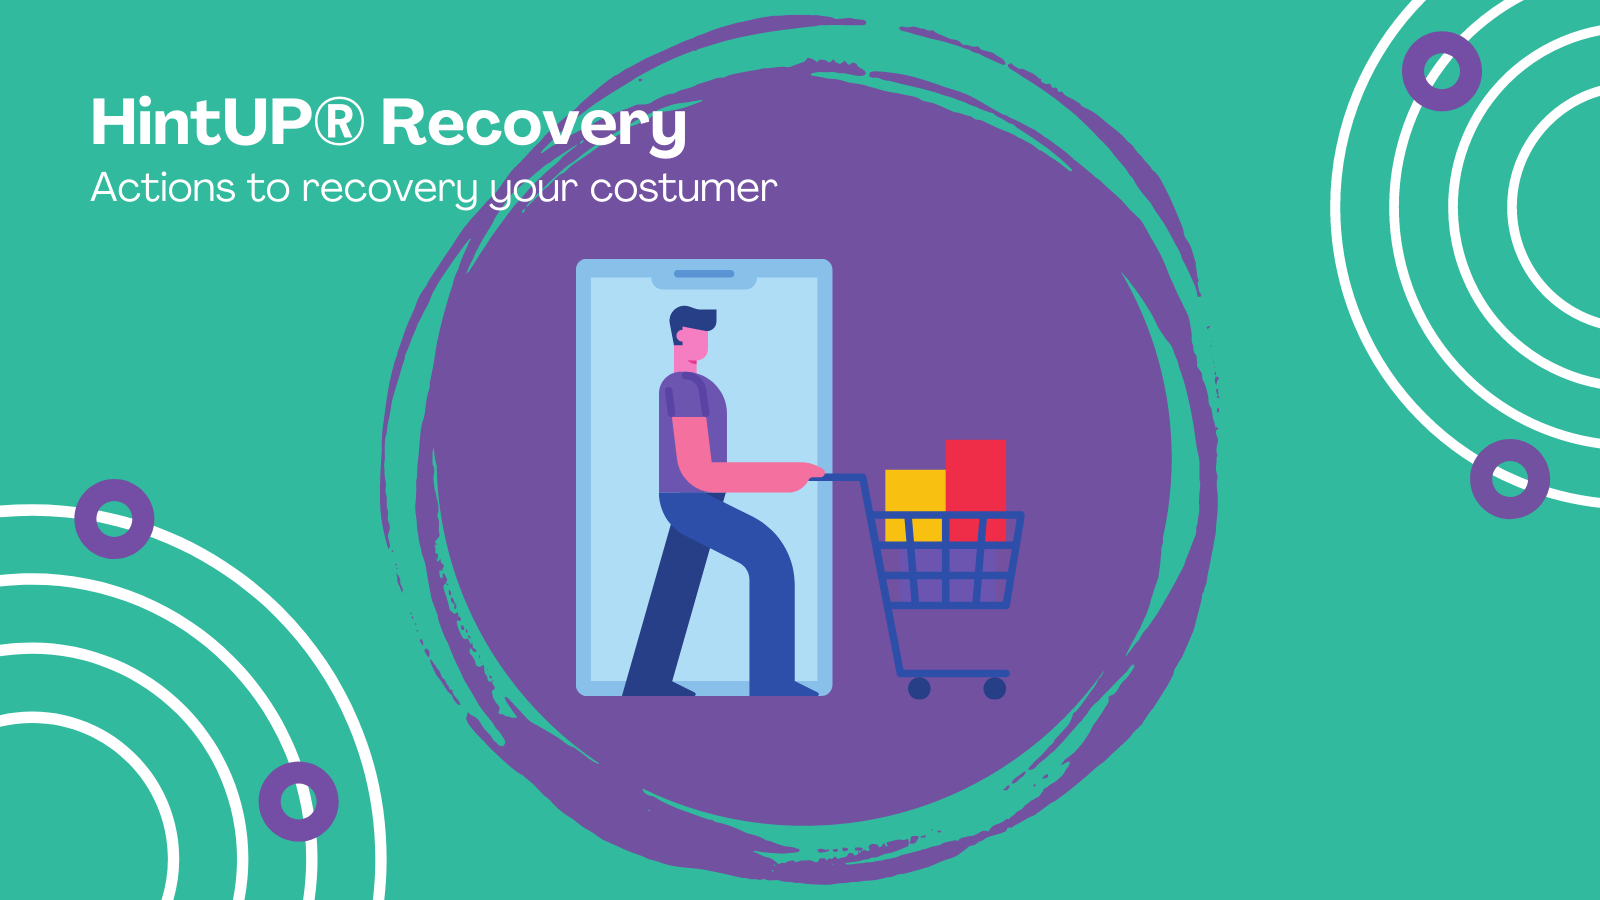 HintUP® Recovery - Actions to recovery your costumers